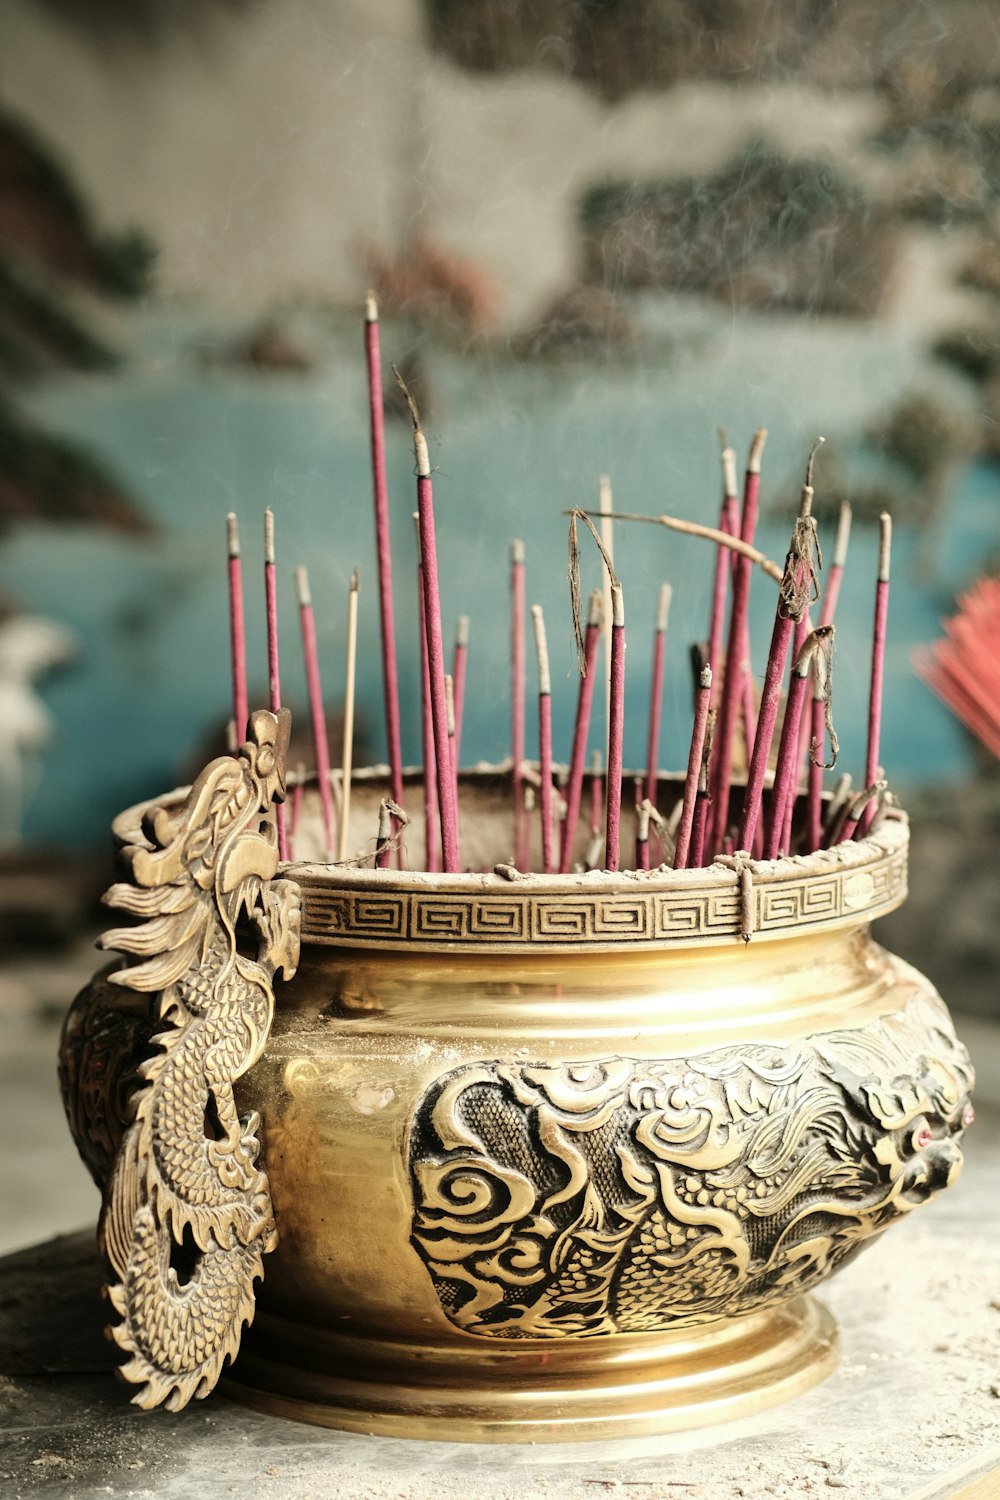 incense sticks in a brass bowl with a dragon decoration